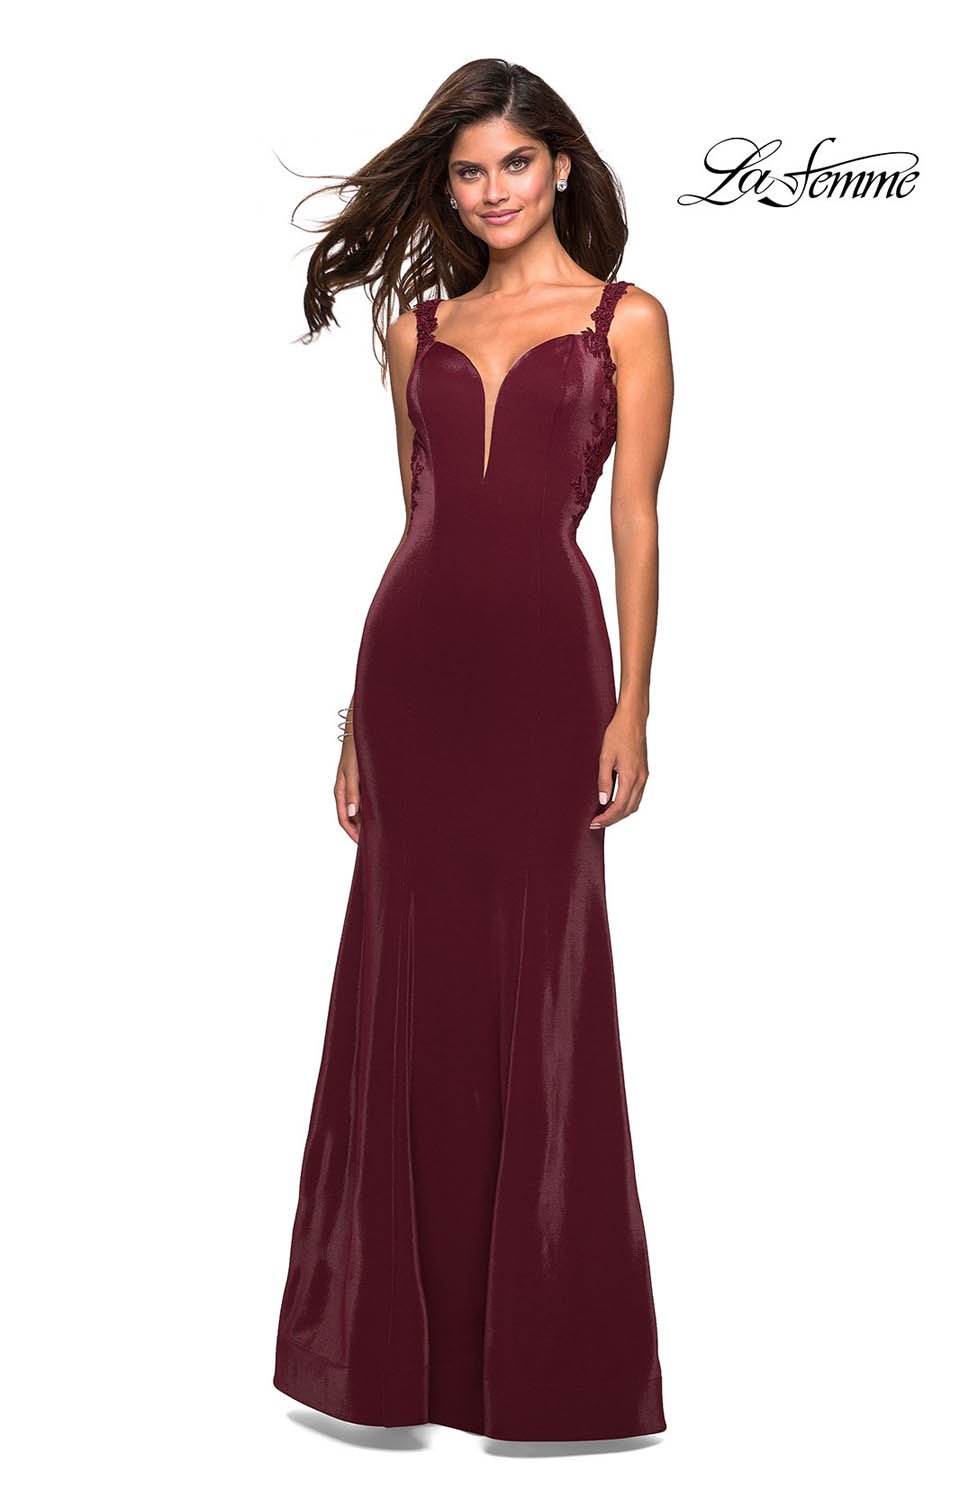 La Femme 27474 dress images in these colors: Wine.